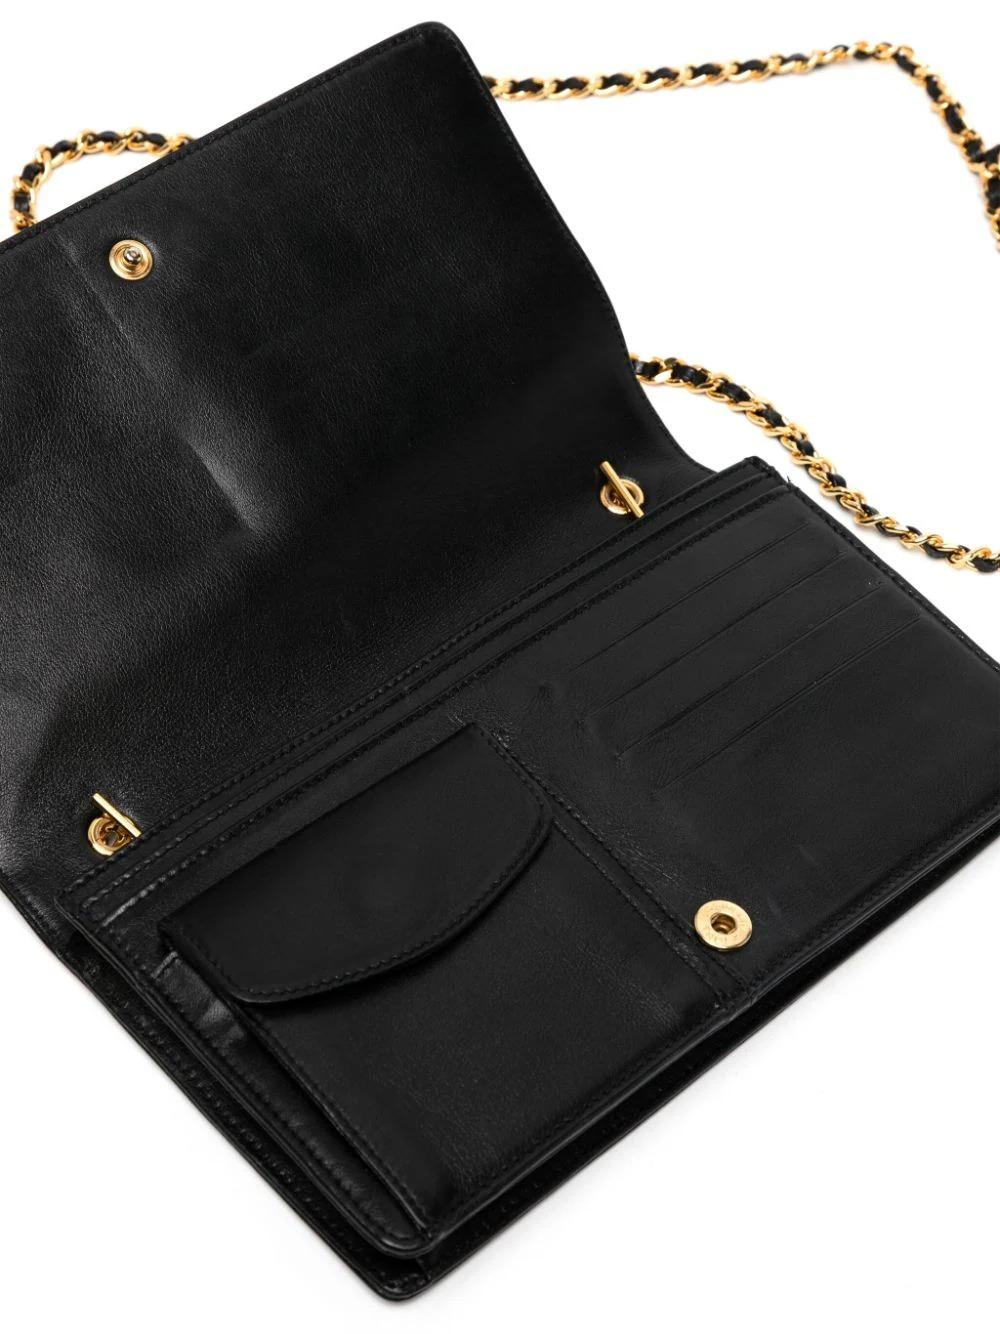 Chanel 1996 Vintage Woc Wallet On A Chain Black Calfskin Leather Cross Body Bag For Sale 1